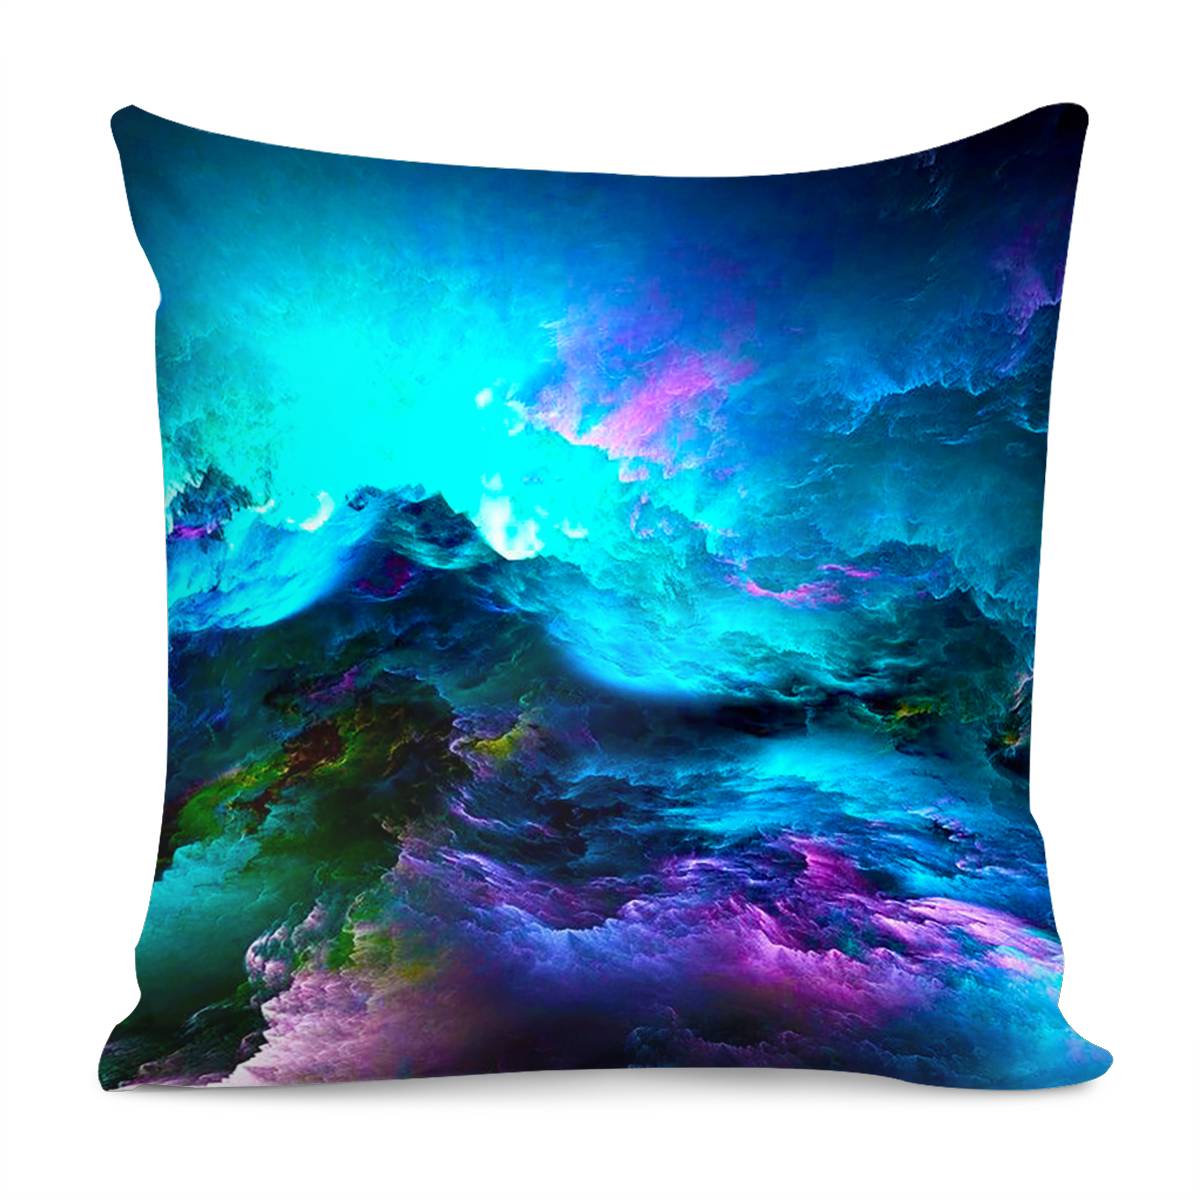 Dream Waves - Pillow Cover